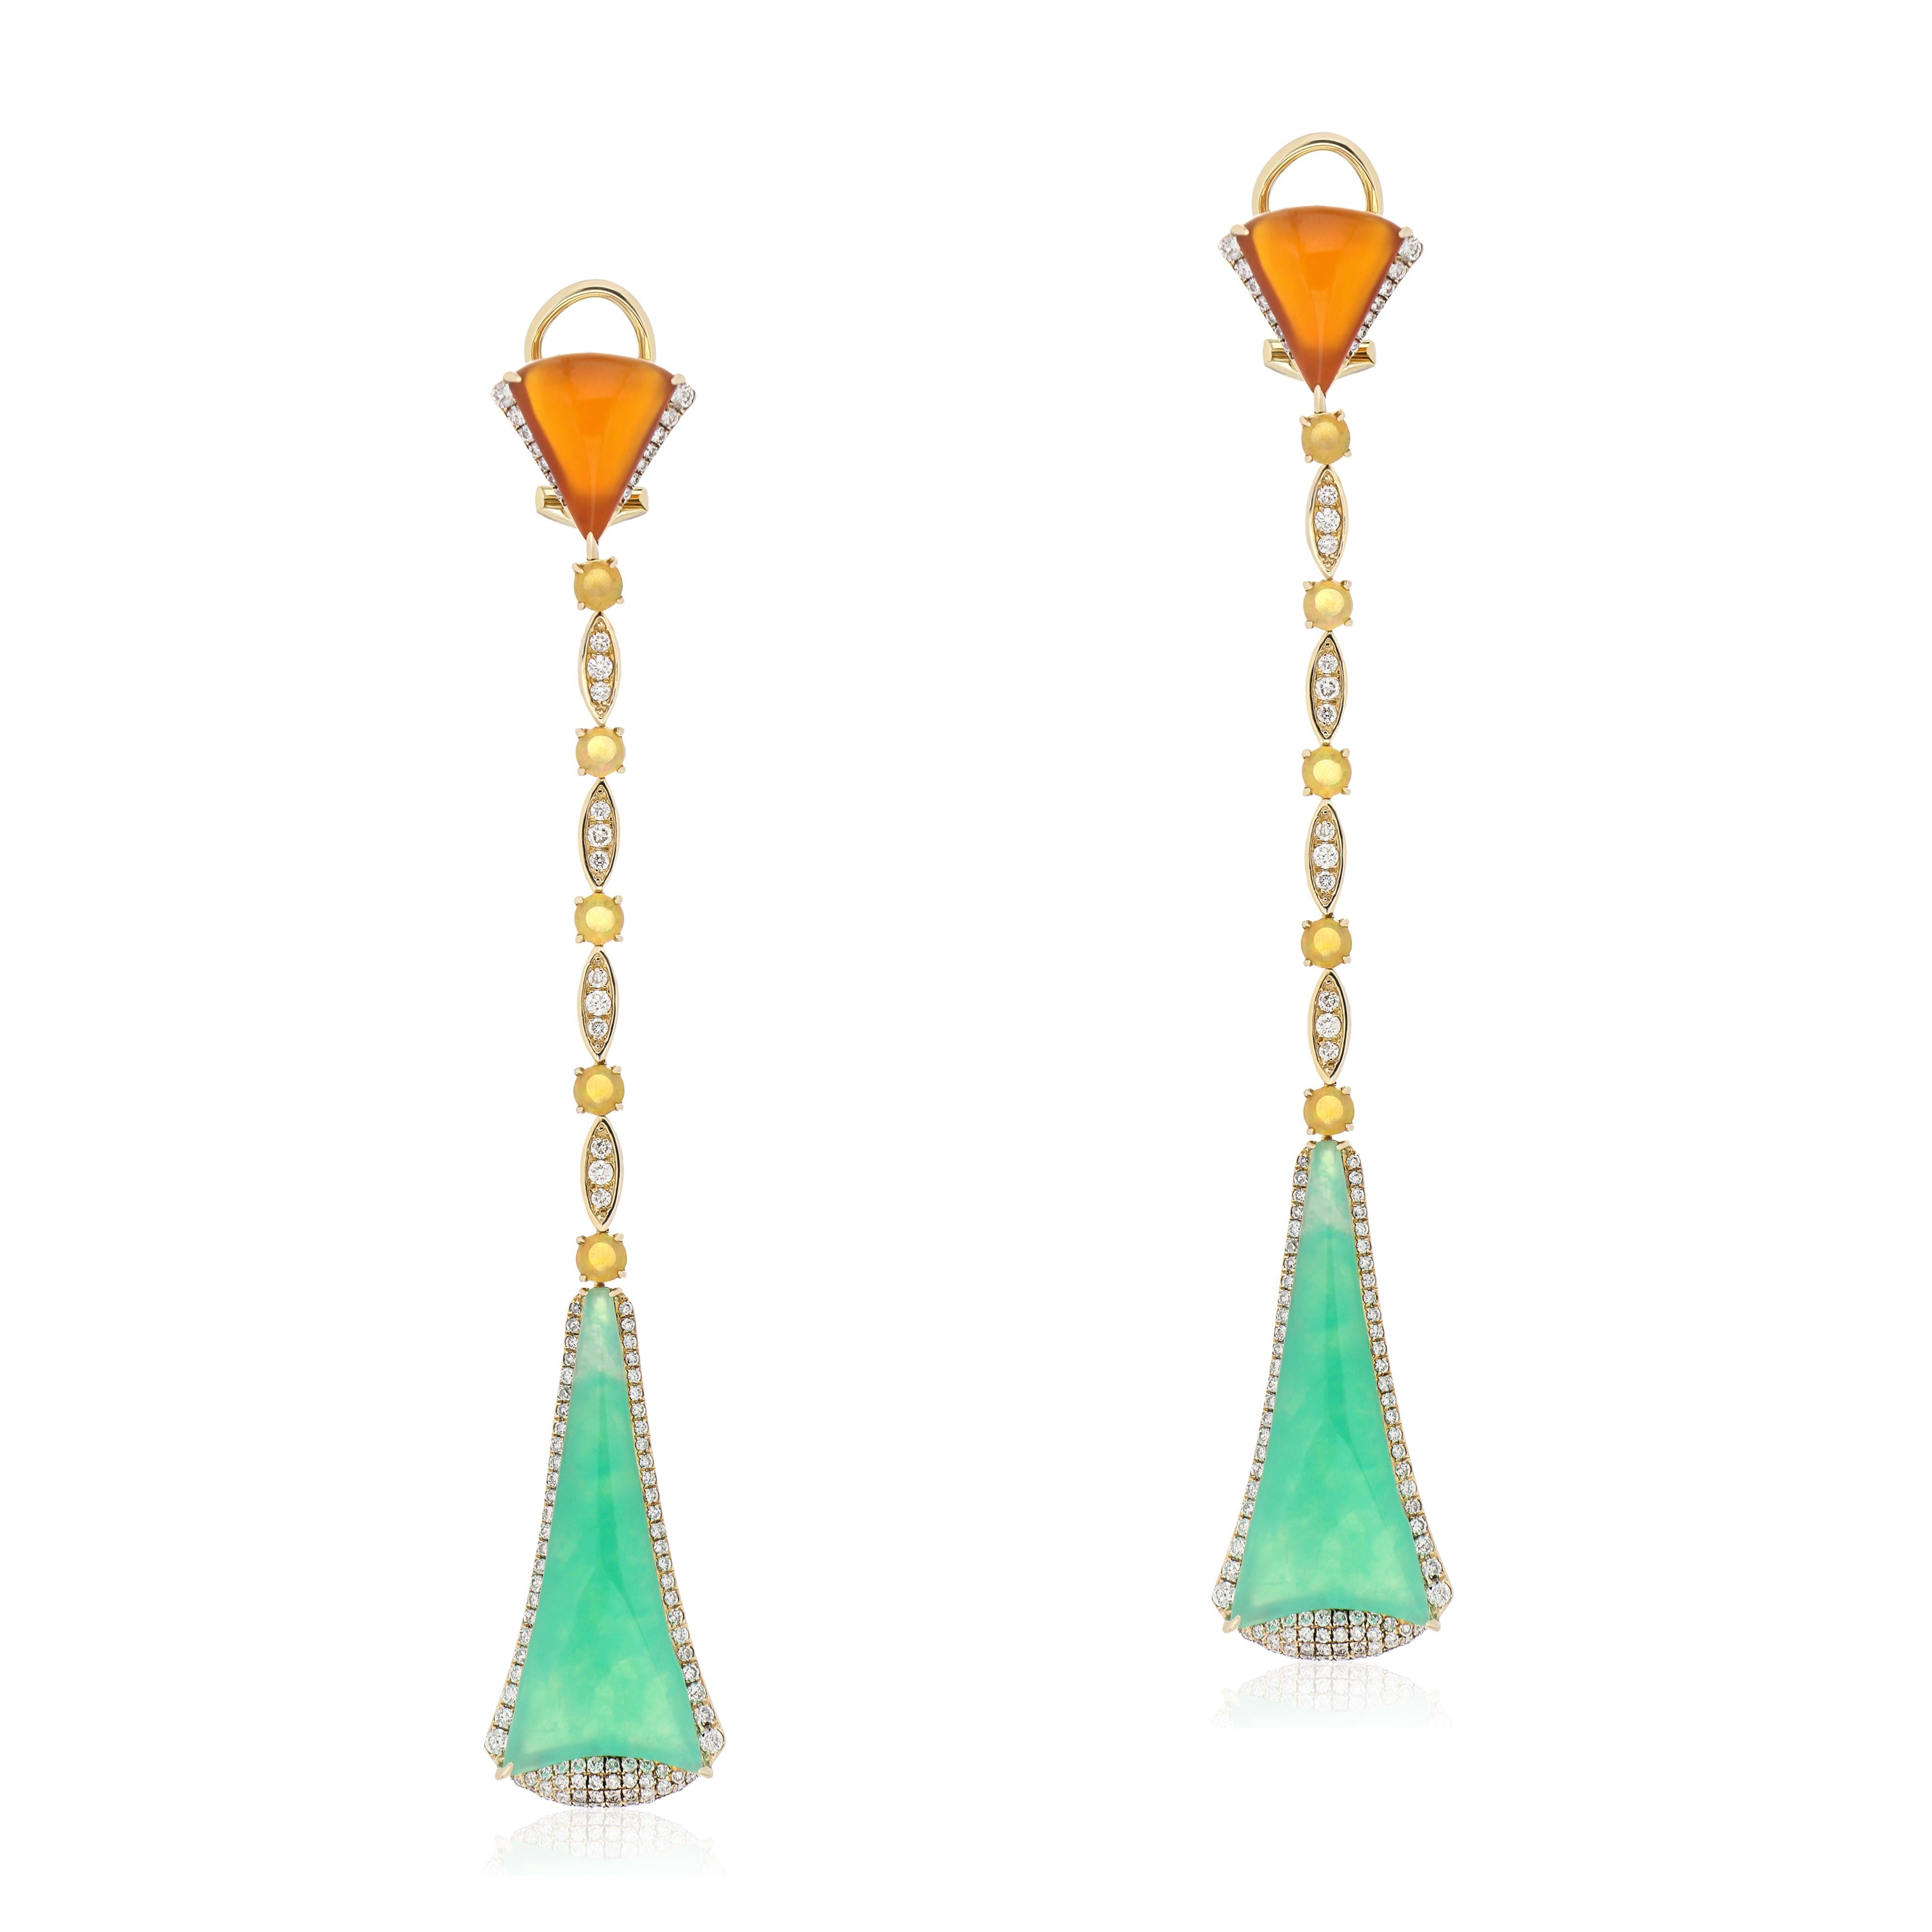 Elegant and exquisitely detailed 14 Karat Yellow Gold Dangle Earring, set with 10.90Cts .Fancy Shape Chrysoprase & 3.40 Cts Carnelian, accented with 0.73 Cts Ethiopian Opal and micro pave set 1.02 Cts Diamonds. Beautifully Hand crafted in 14 Karat